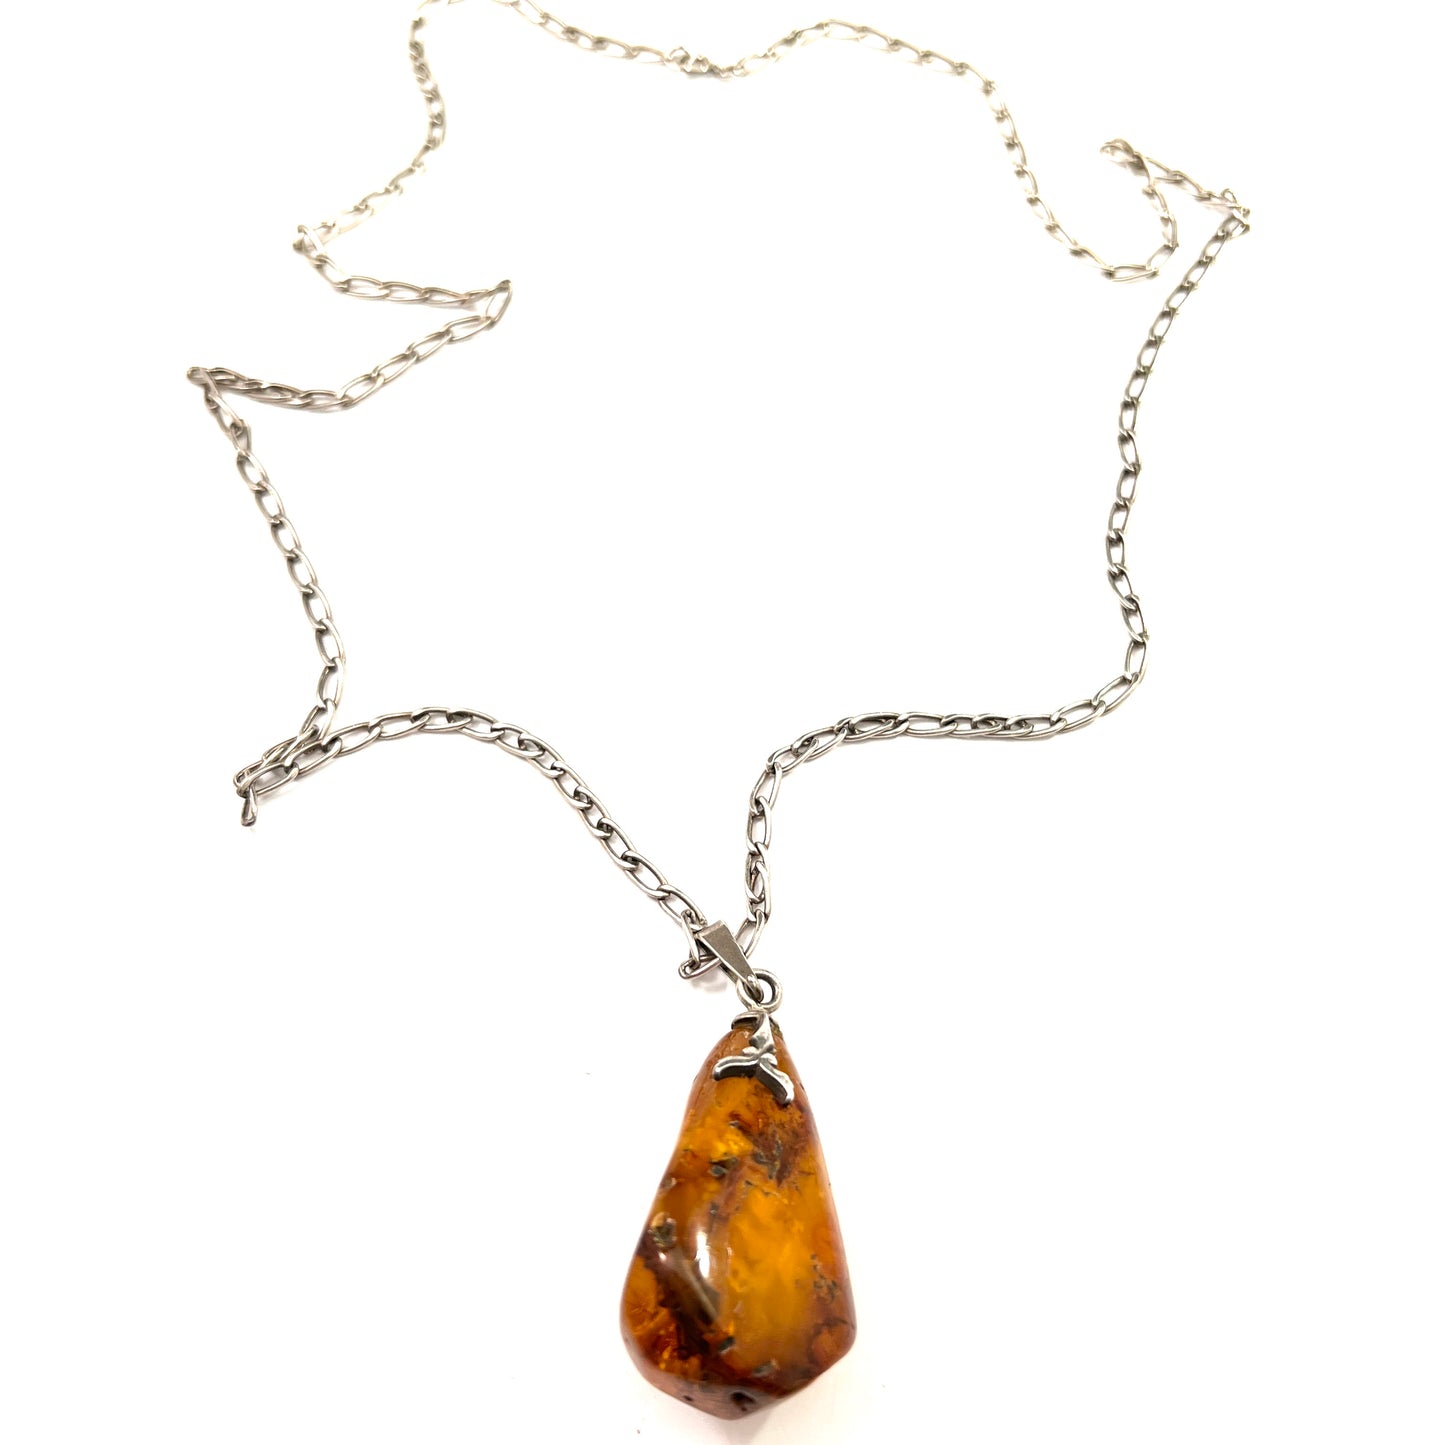 Maker RM, Poland 1963-86. Vintage Silver Large Baltic Amber Pendant 31in Chain Necklace.